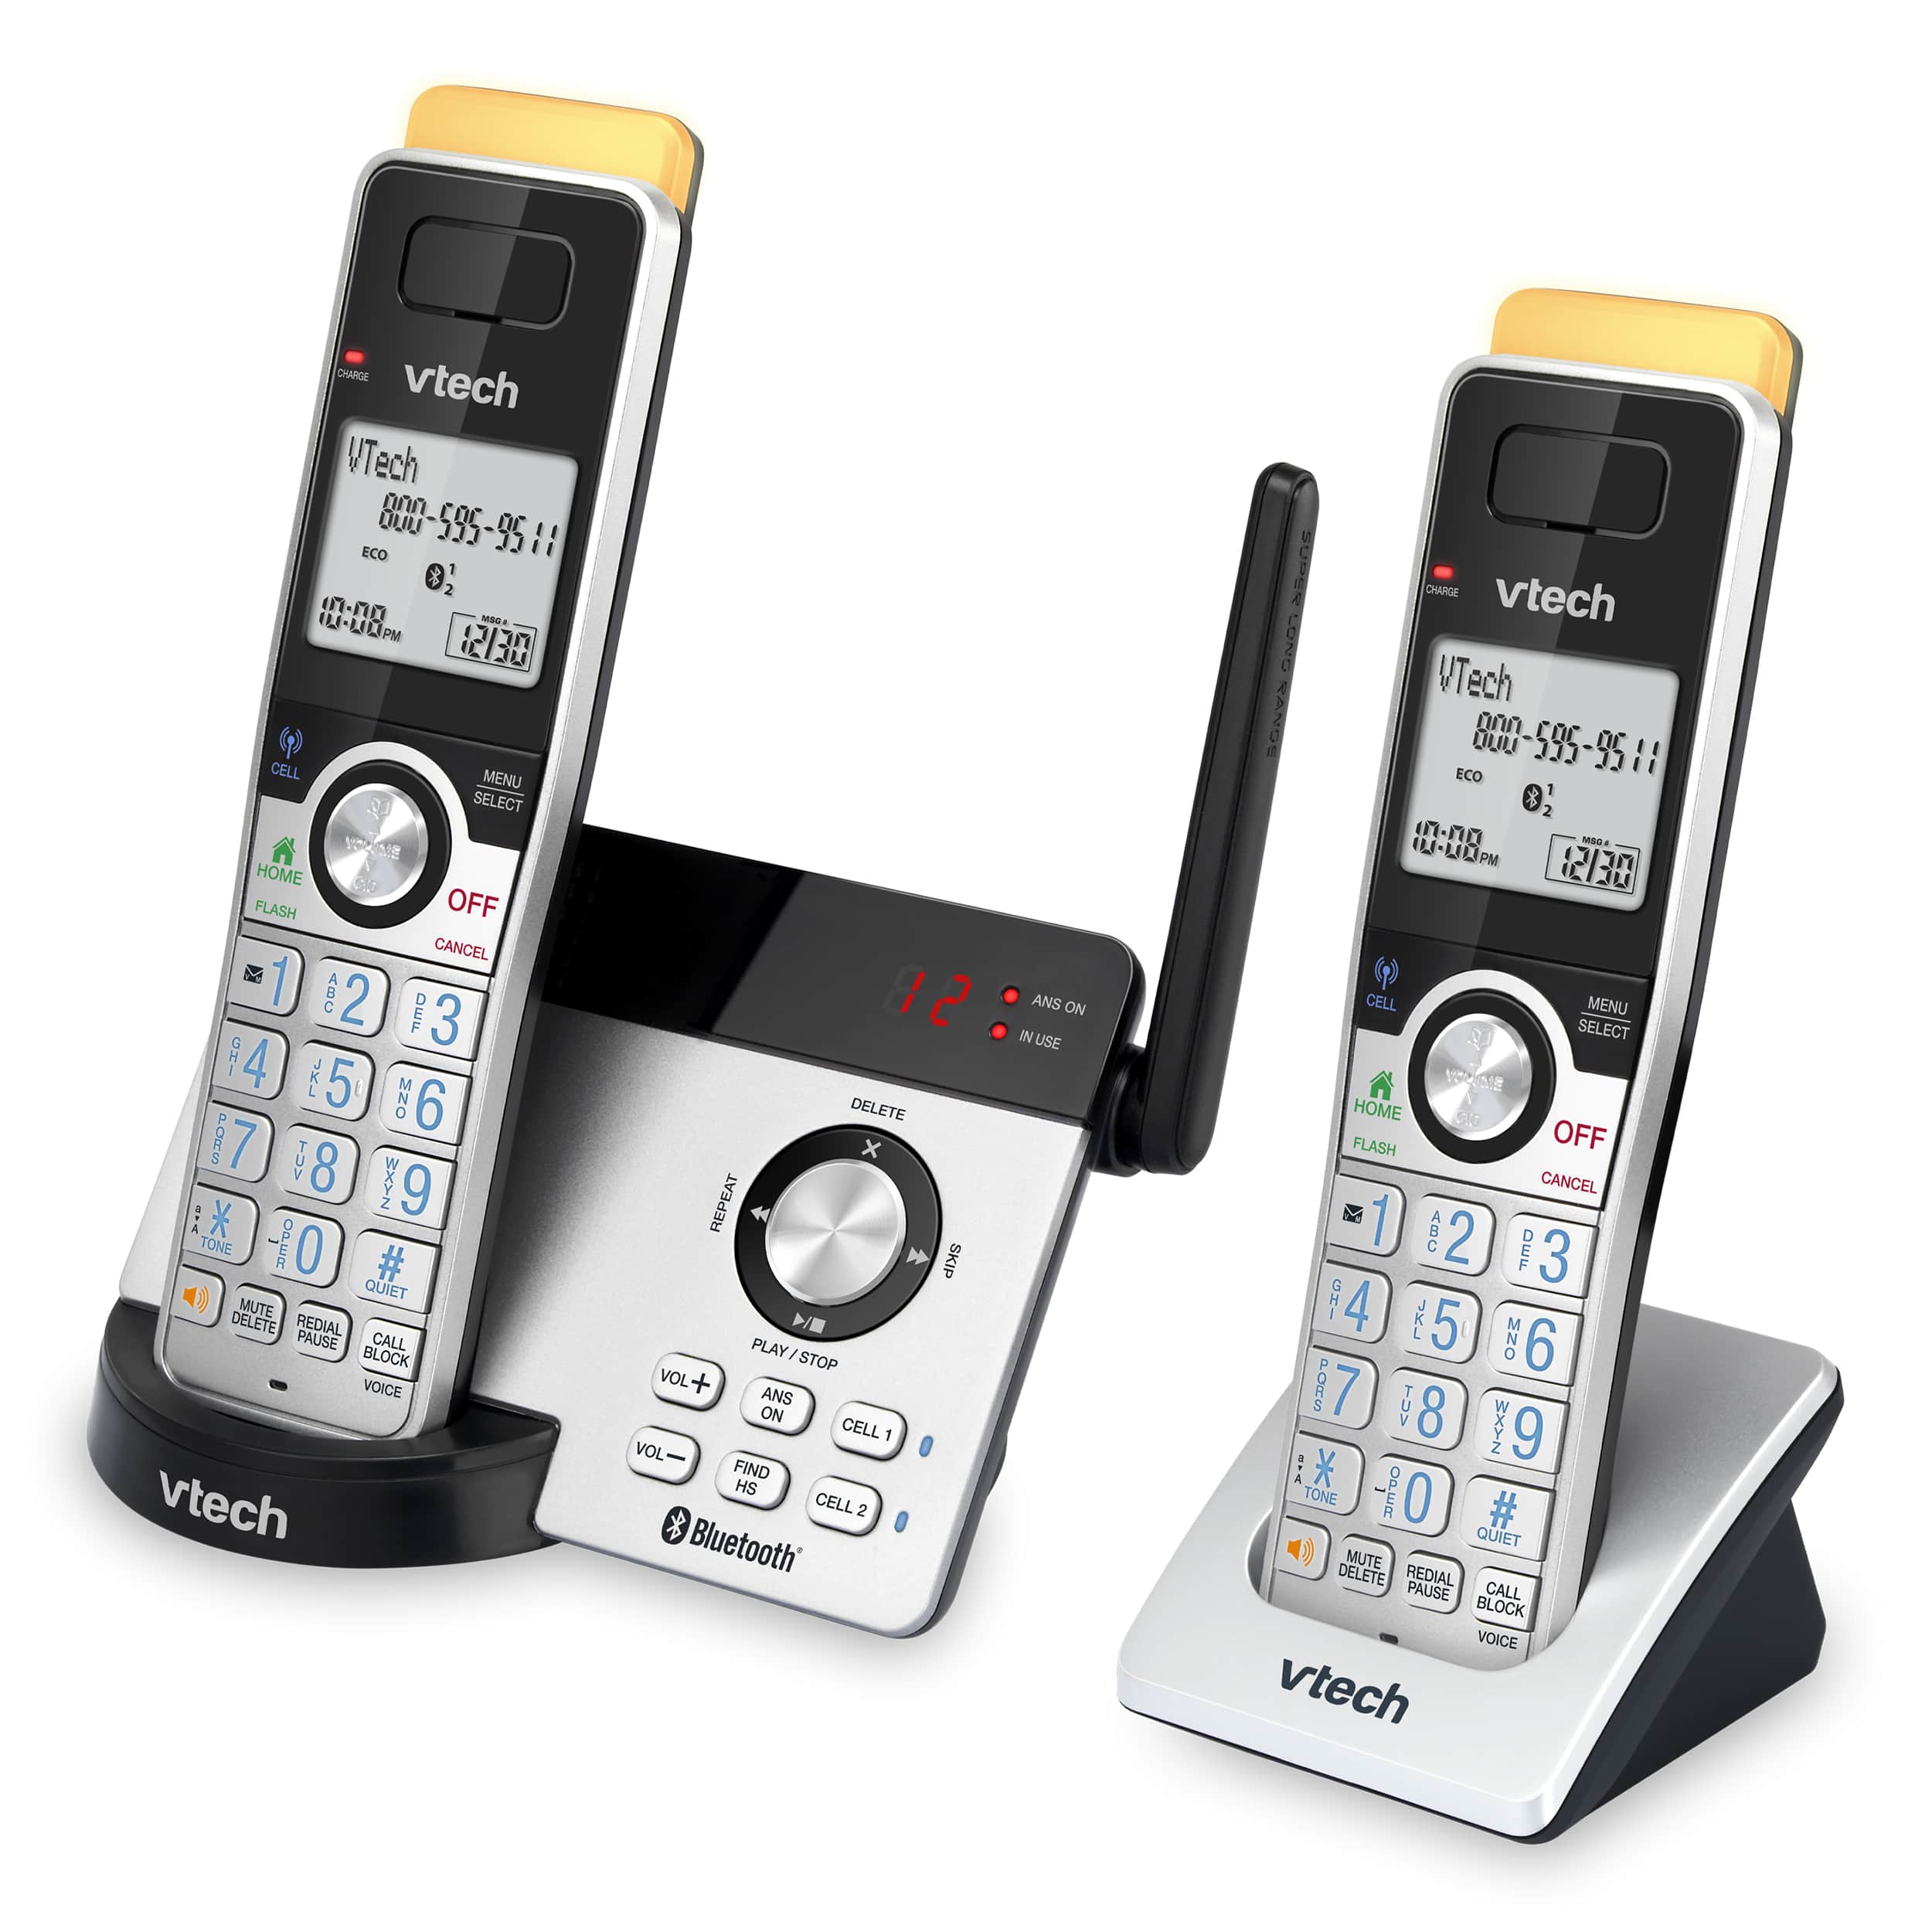 2-Handset Expandable Cordless Phone with Super Long Range, Bluetooth Connect to Cell, Smart Call Blocker and Answering System - view 2